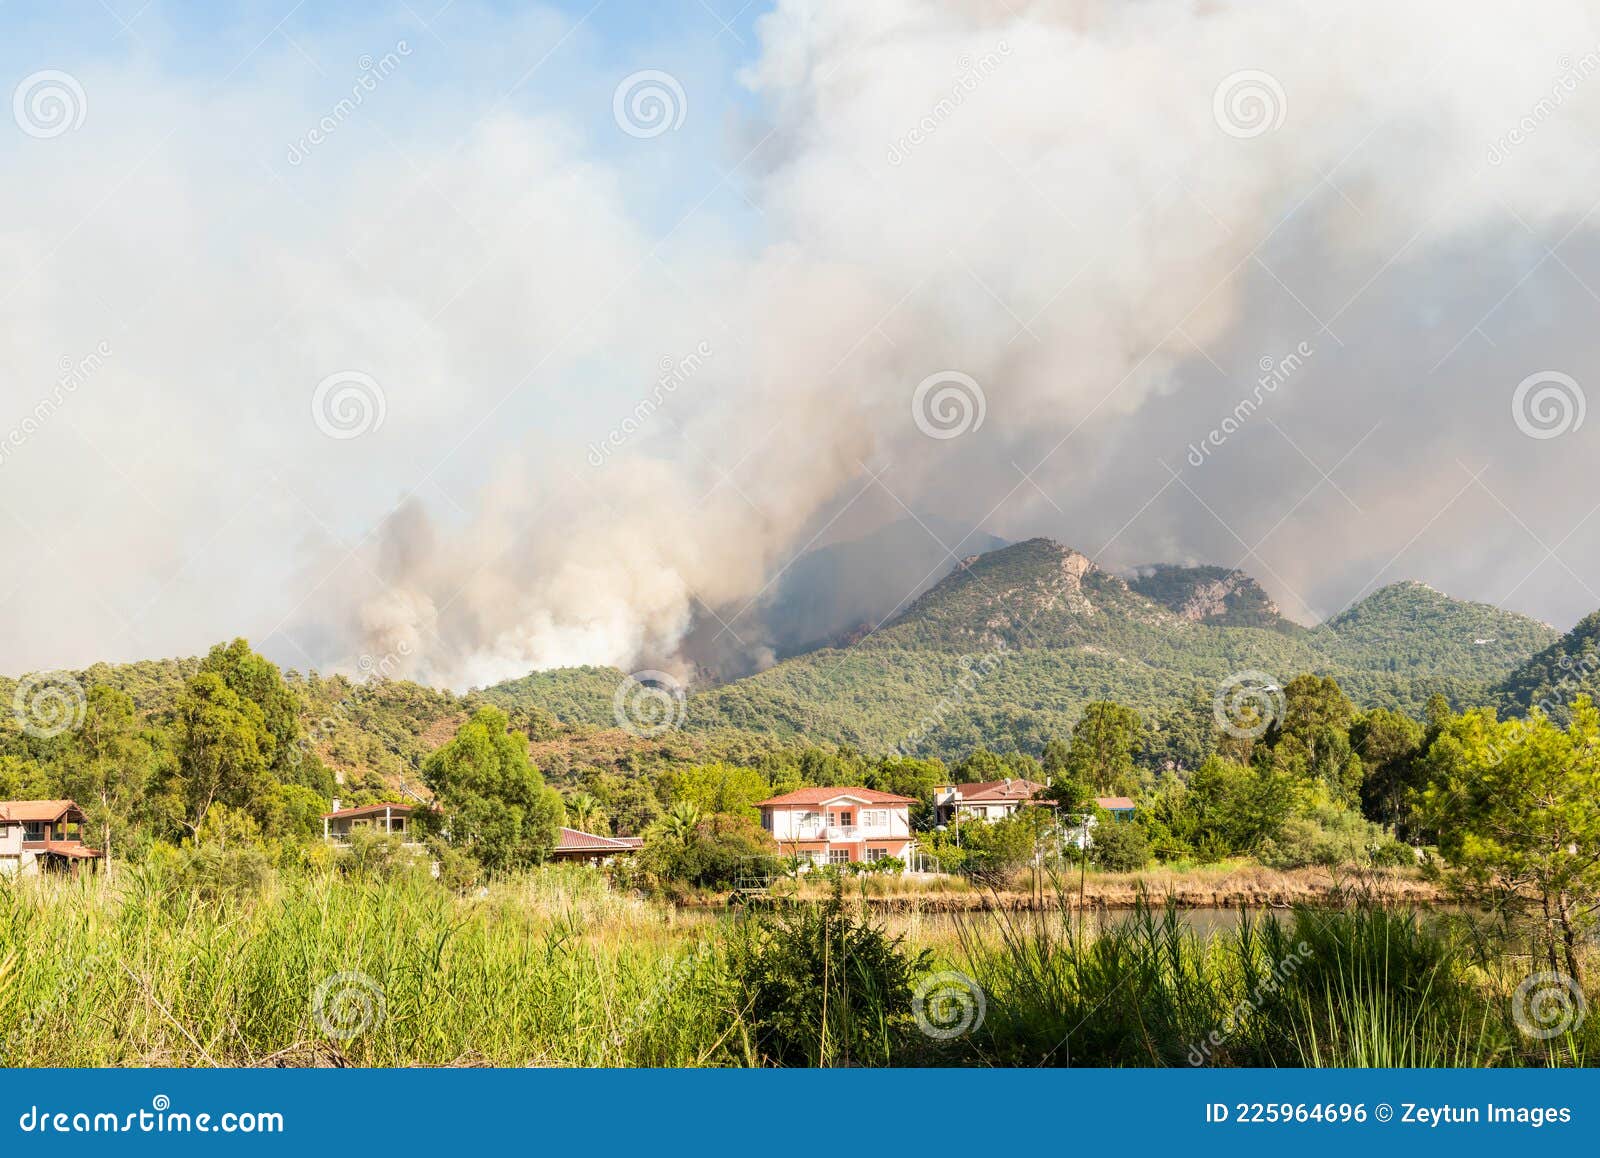 Smoke From A Forest Fire Rising Over Hisaronu ...